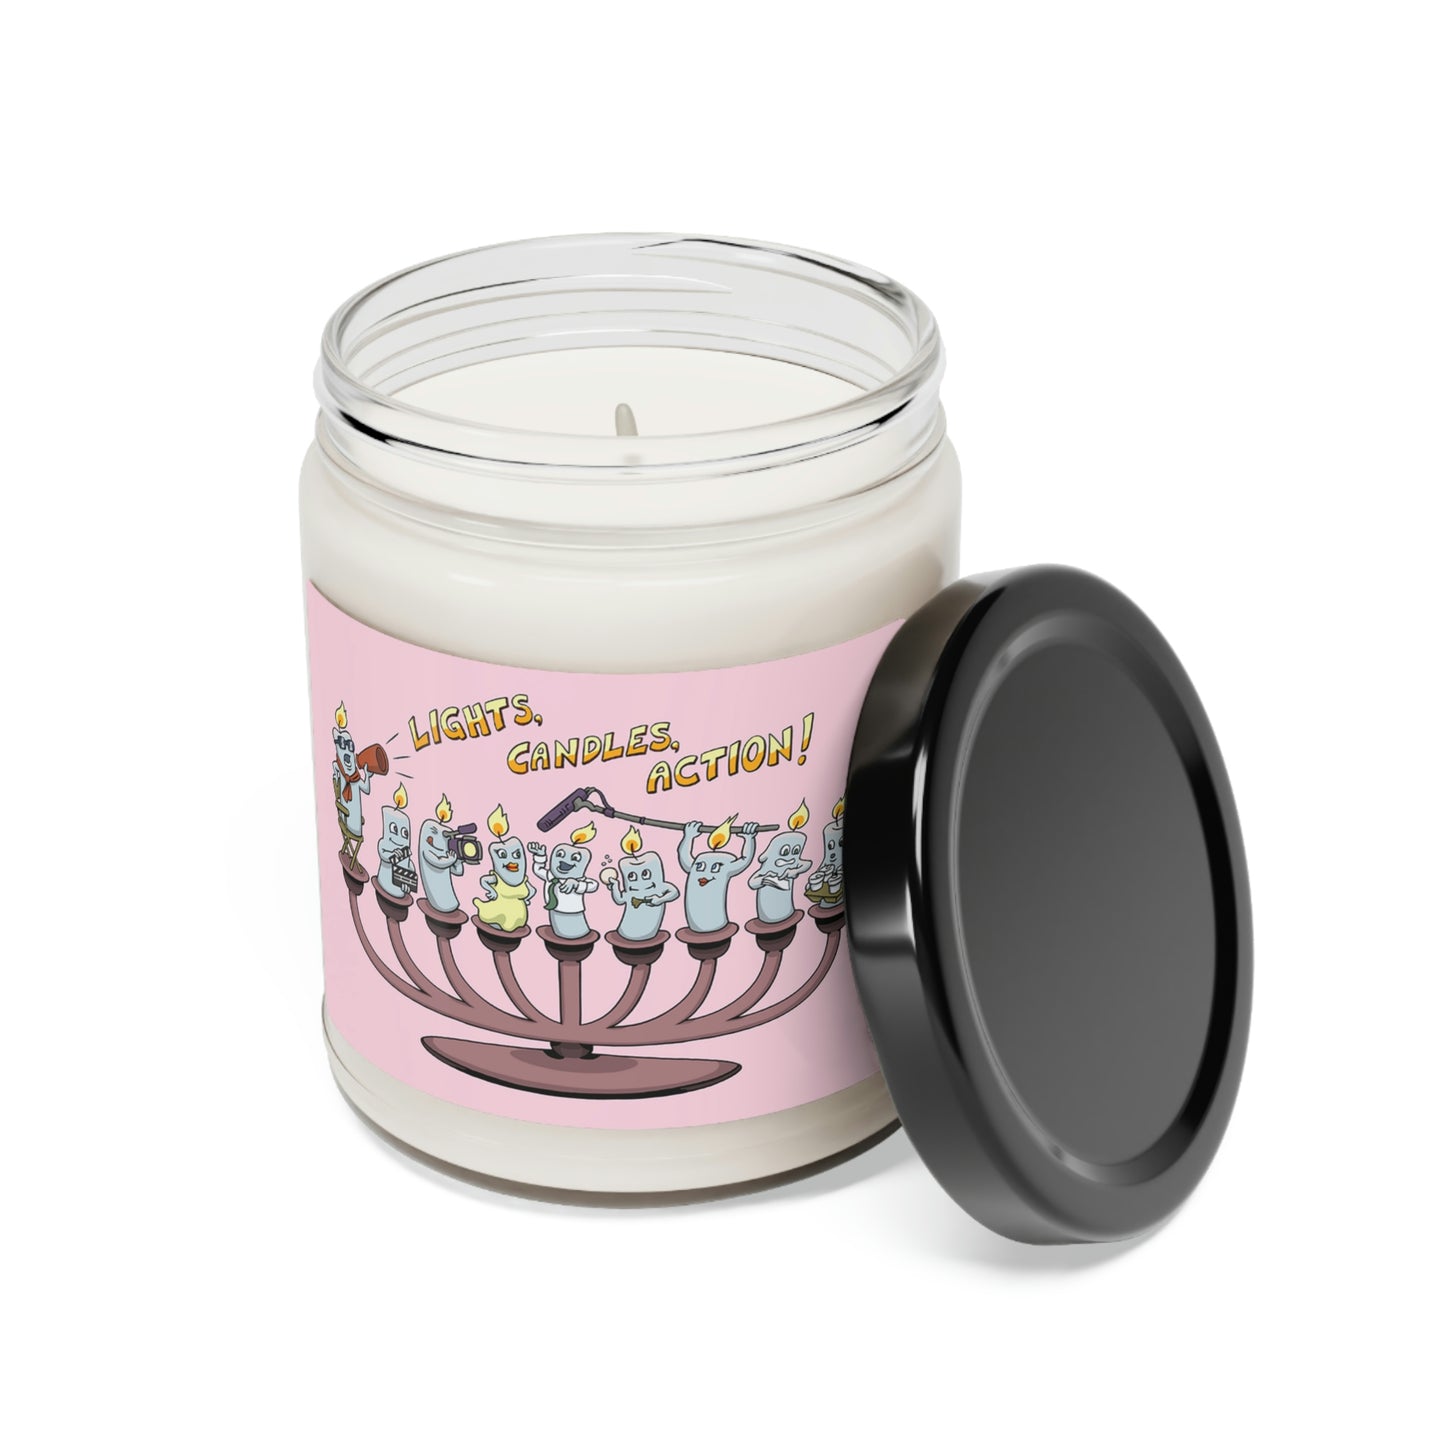 Lights Candles Action Hanukkah Soy Candle, 9oz